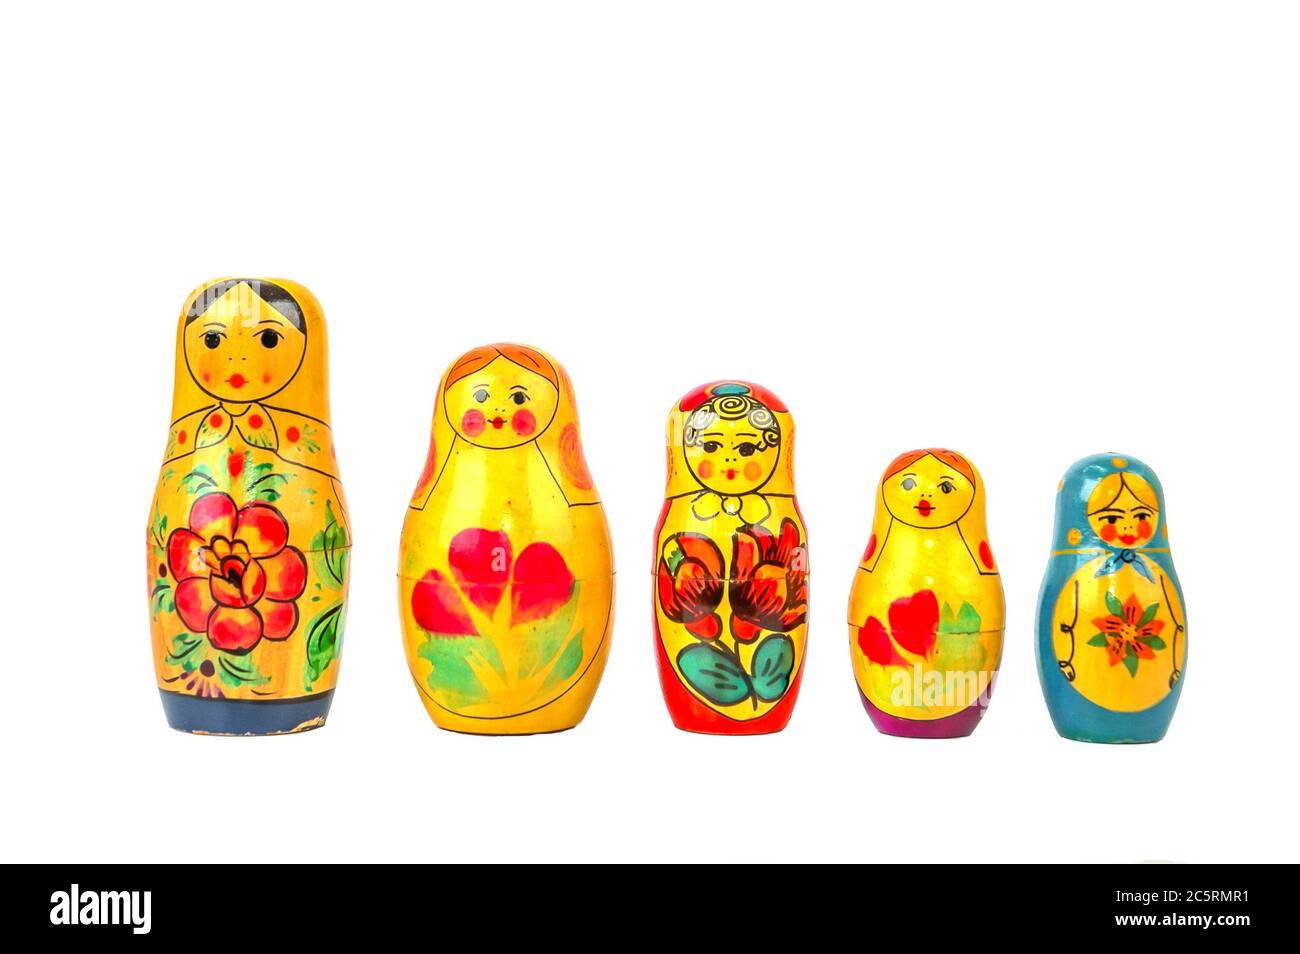 Five Russian nesting doll ranked from highest to lowest on a white background Stock Photo